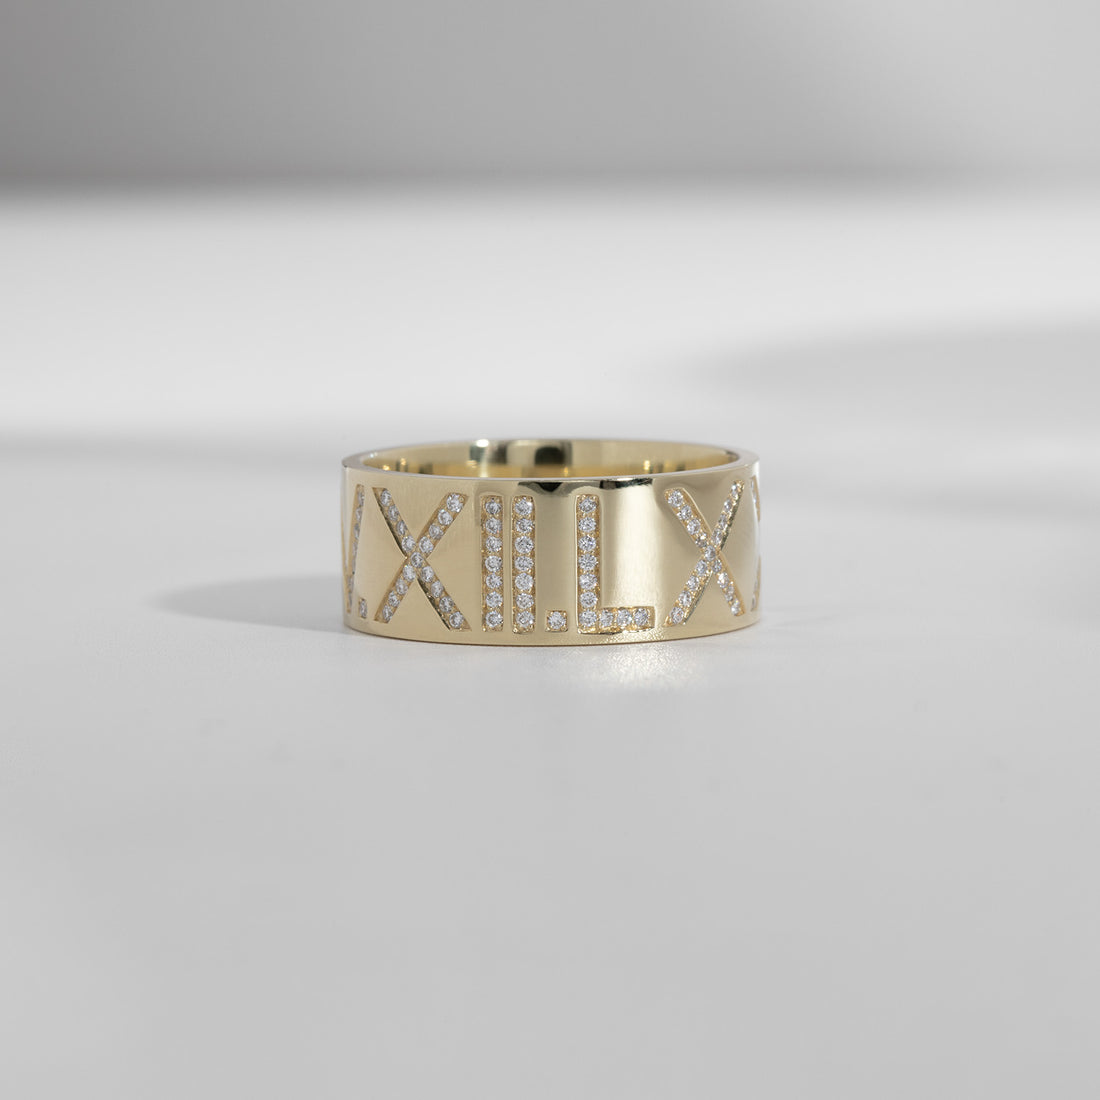 An ILA SODHANI Celebration Ring in yellow gold with white diamonds set into the roman numerals, &quot;V.XII.LX&quot;; shown in front of a white background.